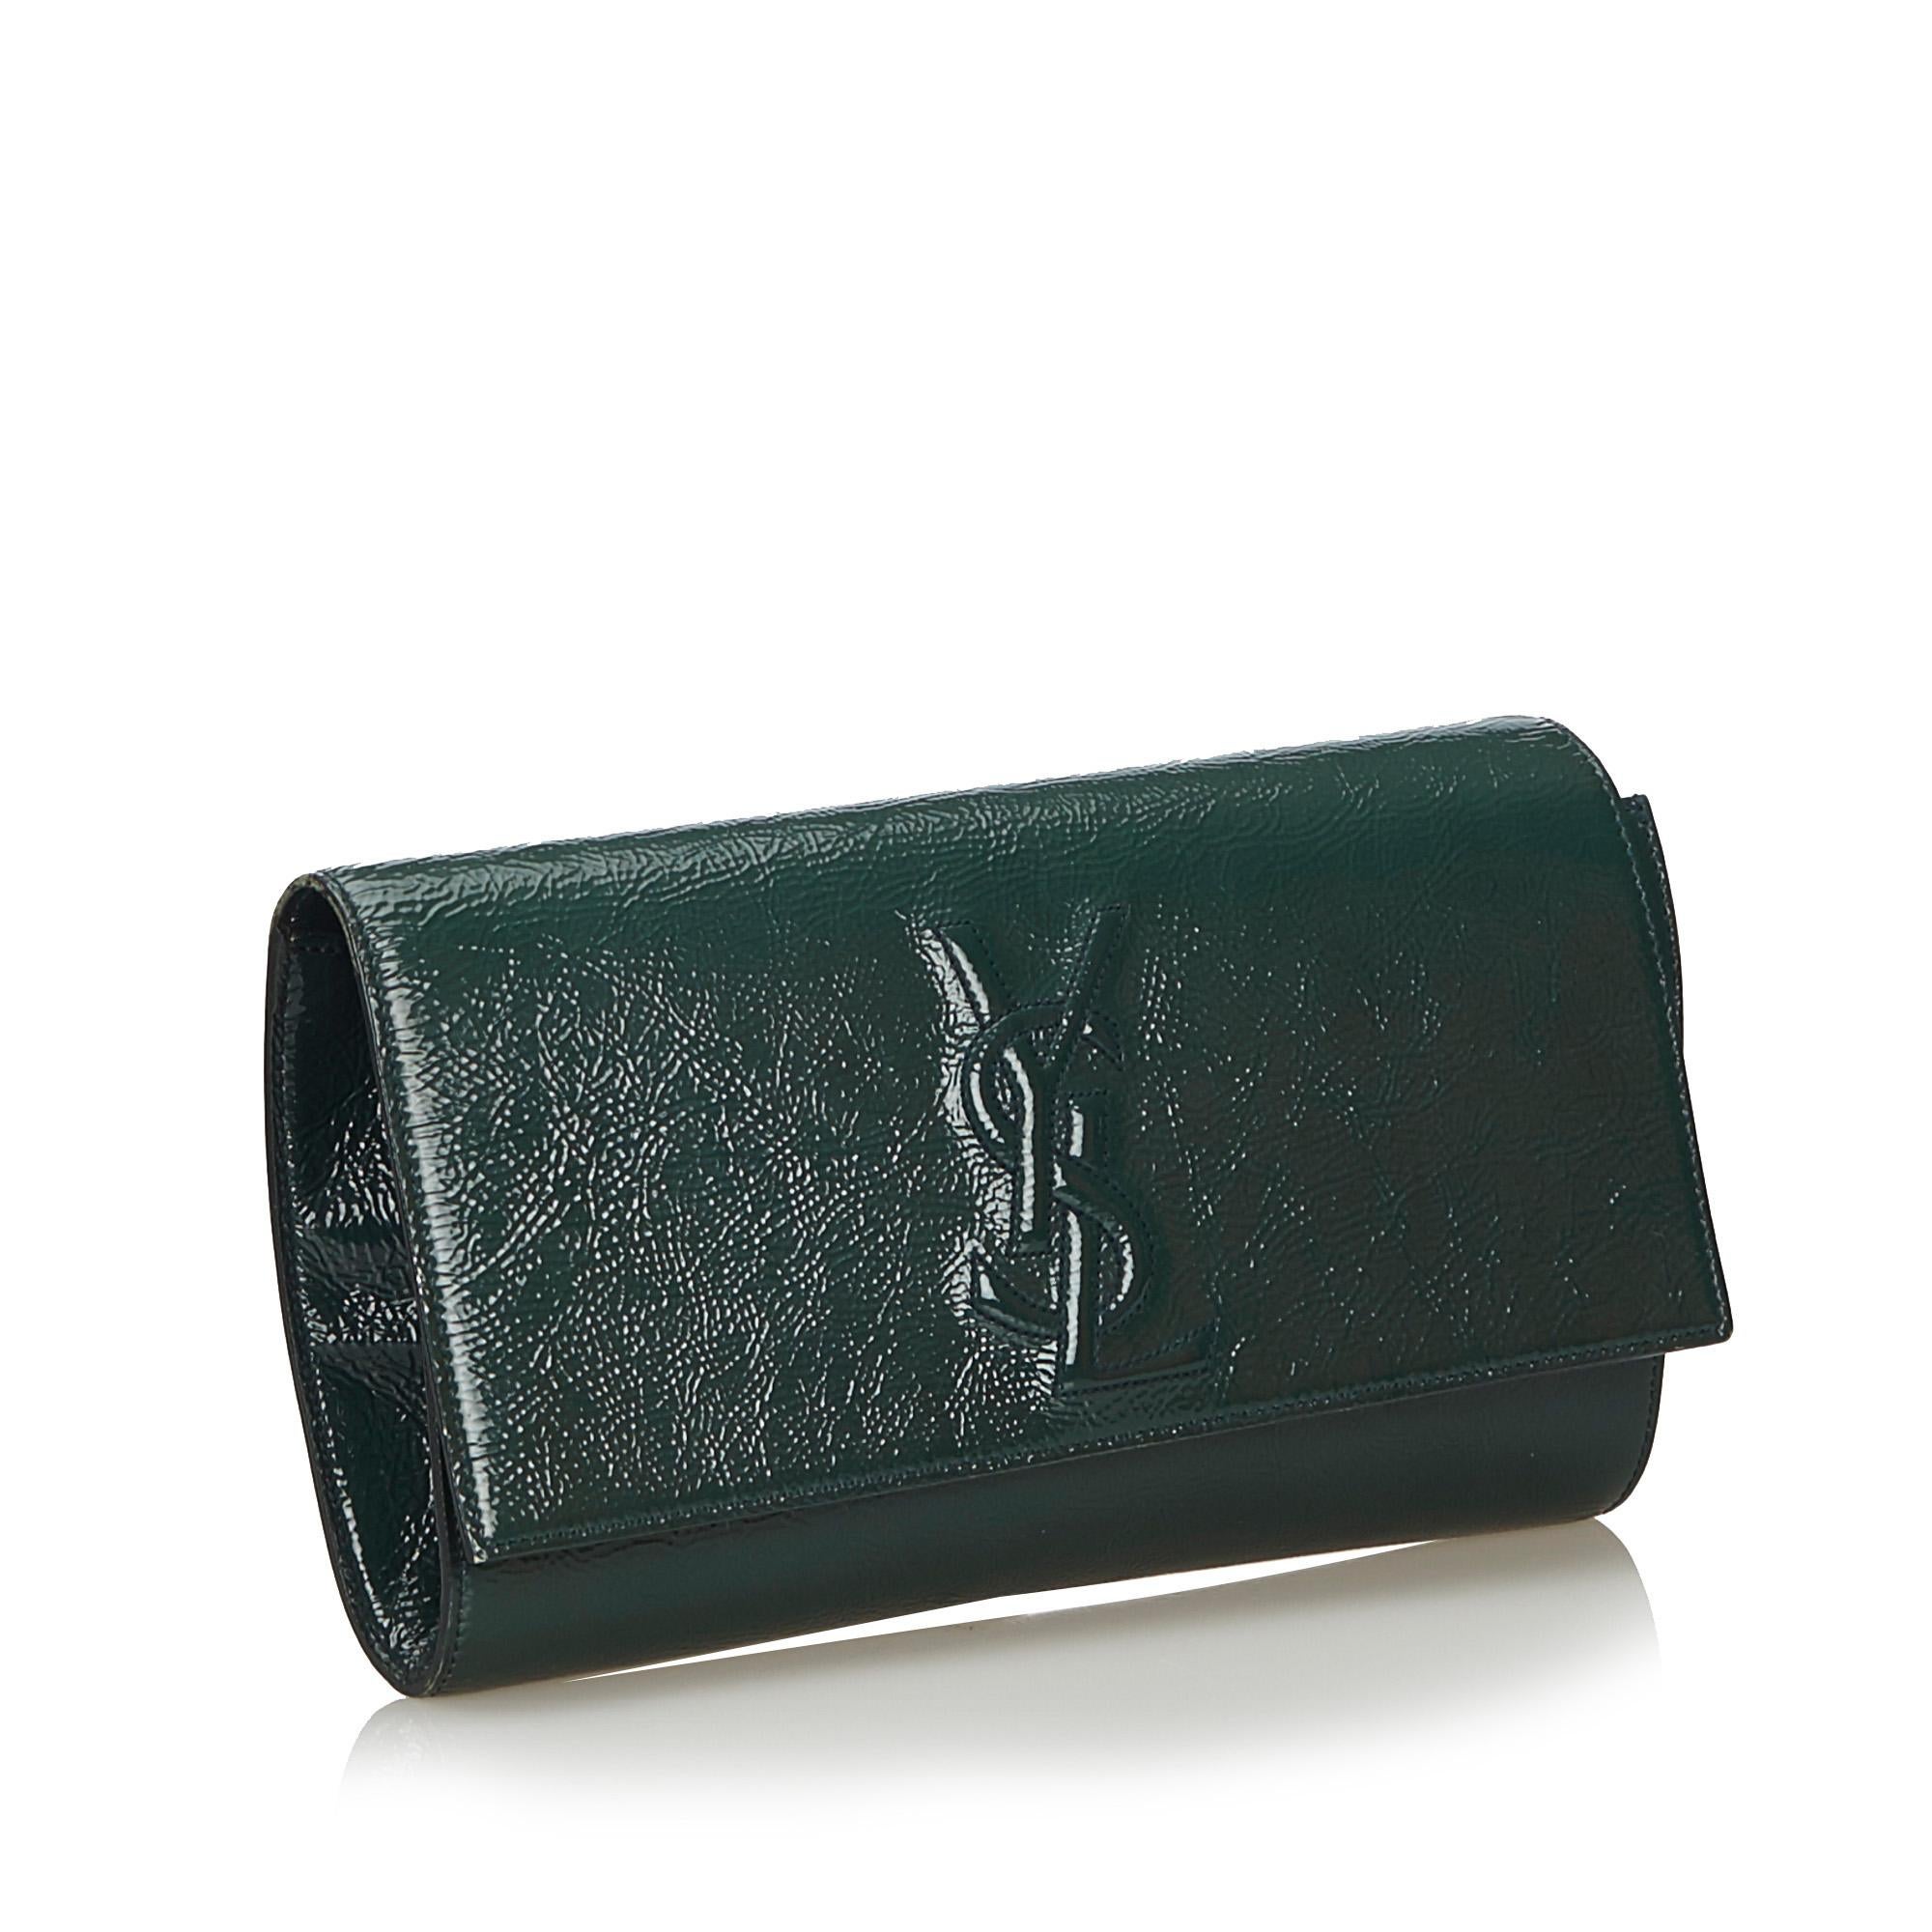 This clutch features a patent leather body, a front flap with a magnetic closure, and an interior slip pocket. It carries as AB condition rating.

Inclusions: 
Dust Bag

Dimensions:
Length: 18.00 cm
Width: 29.00 cm
Depth: 2.00 cm

Material: Leather